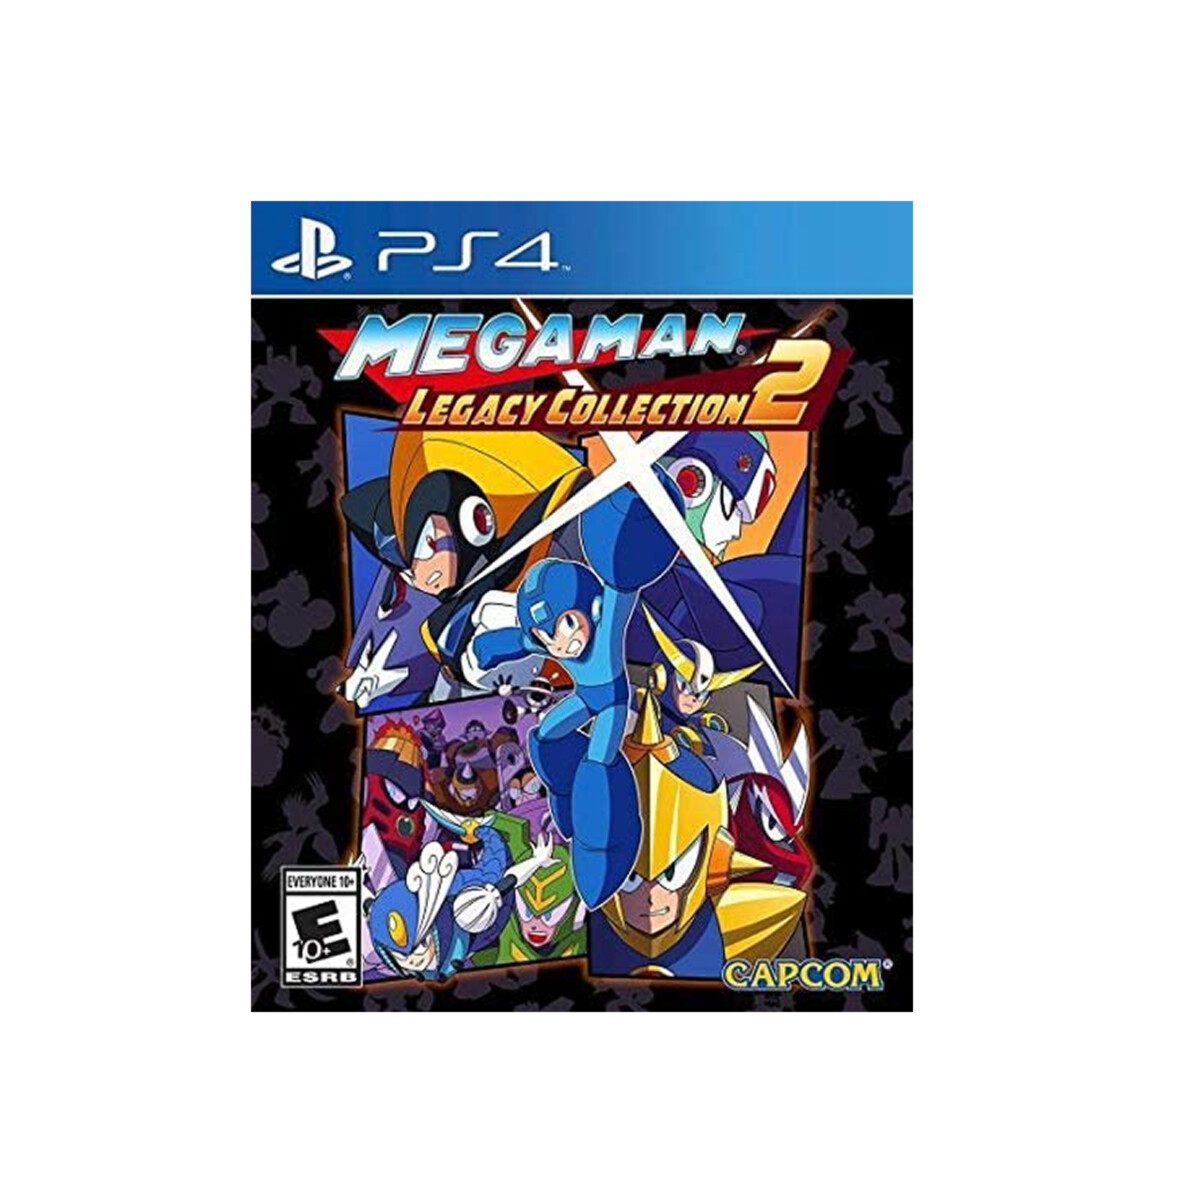 PS4 MEGAMAN LEGACY COLLECTION 2 